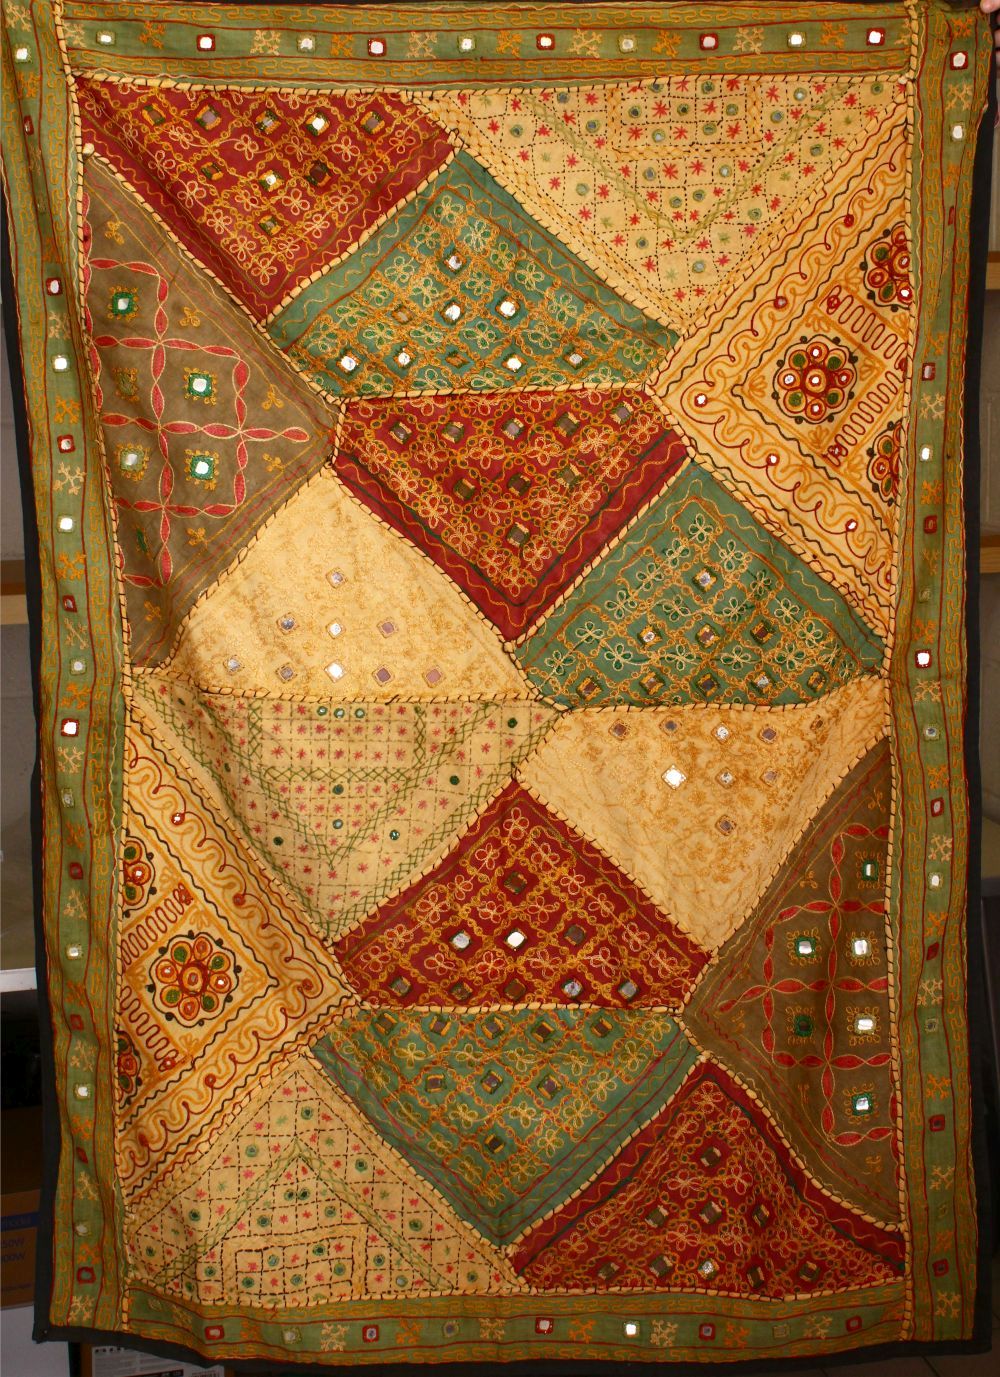 TWO ISLAMIC TEXTILES, both with stitched in mirrored sections, 150cm x 100cm and 100cm x 95cm.